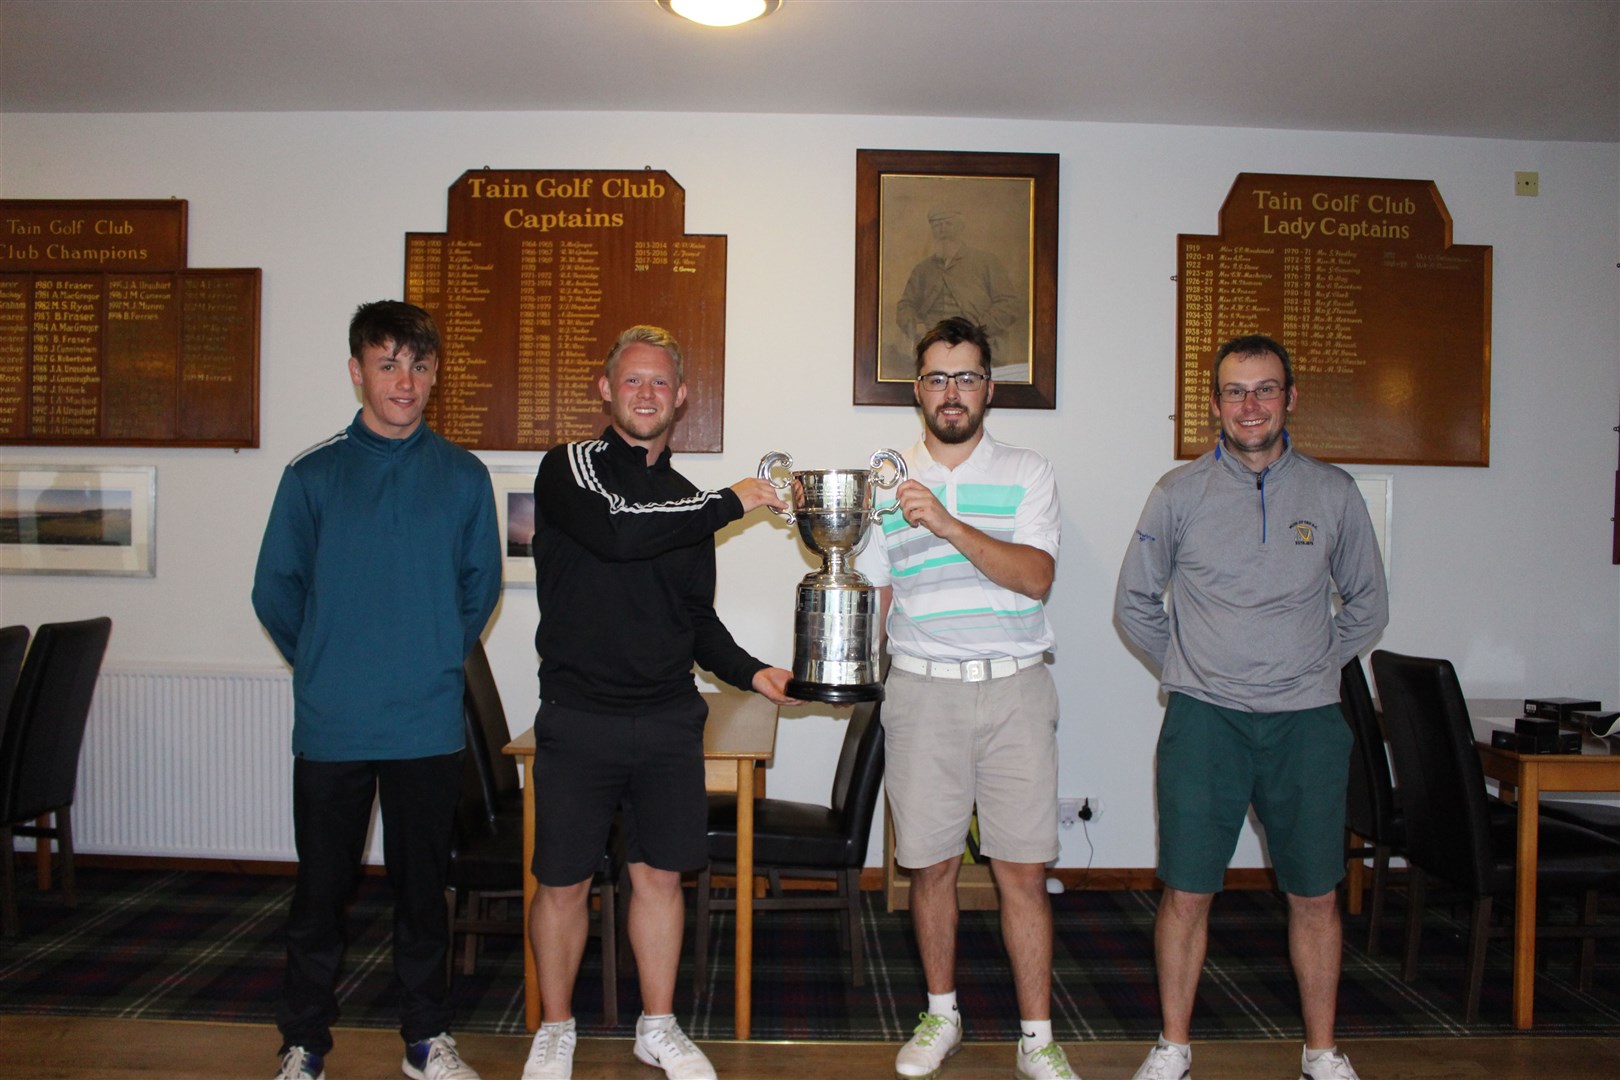 Muir of Ord Golf Club won the Northern Counties Cup for the first time in 33 years. The team, Nathan Mackenzie, Shaun Johnson, Jamie Whittet and John Forbes, are pictured with the trophy after returning to Muir's clubhouse.